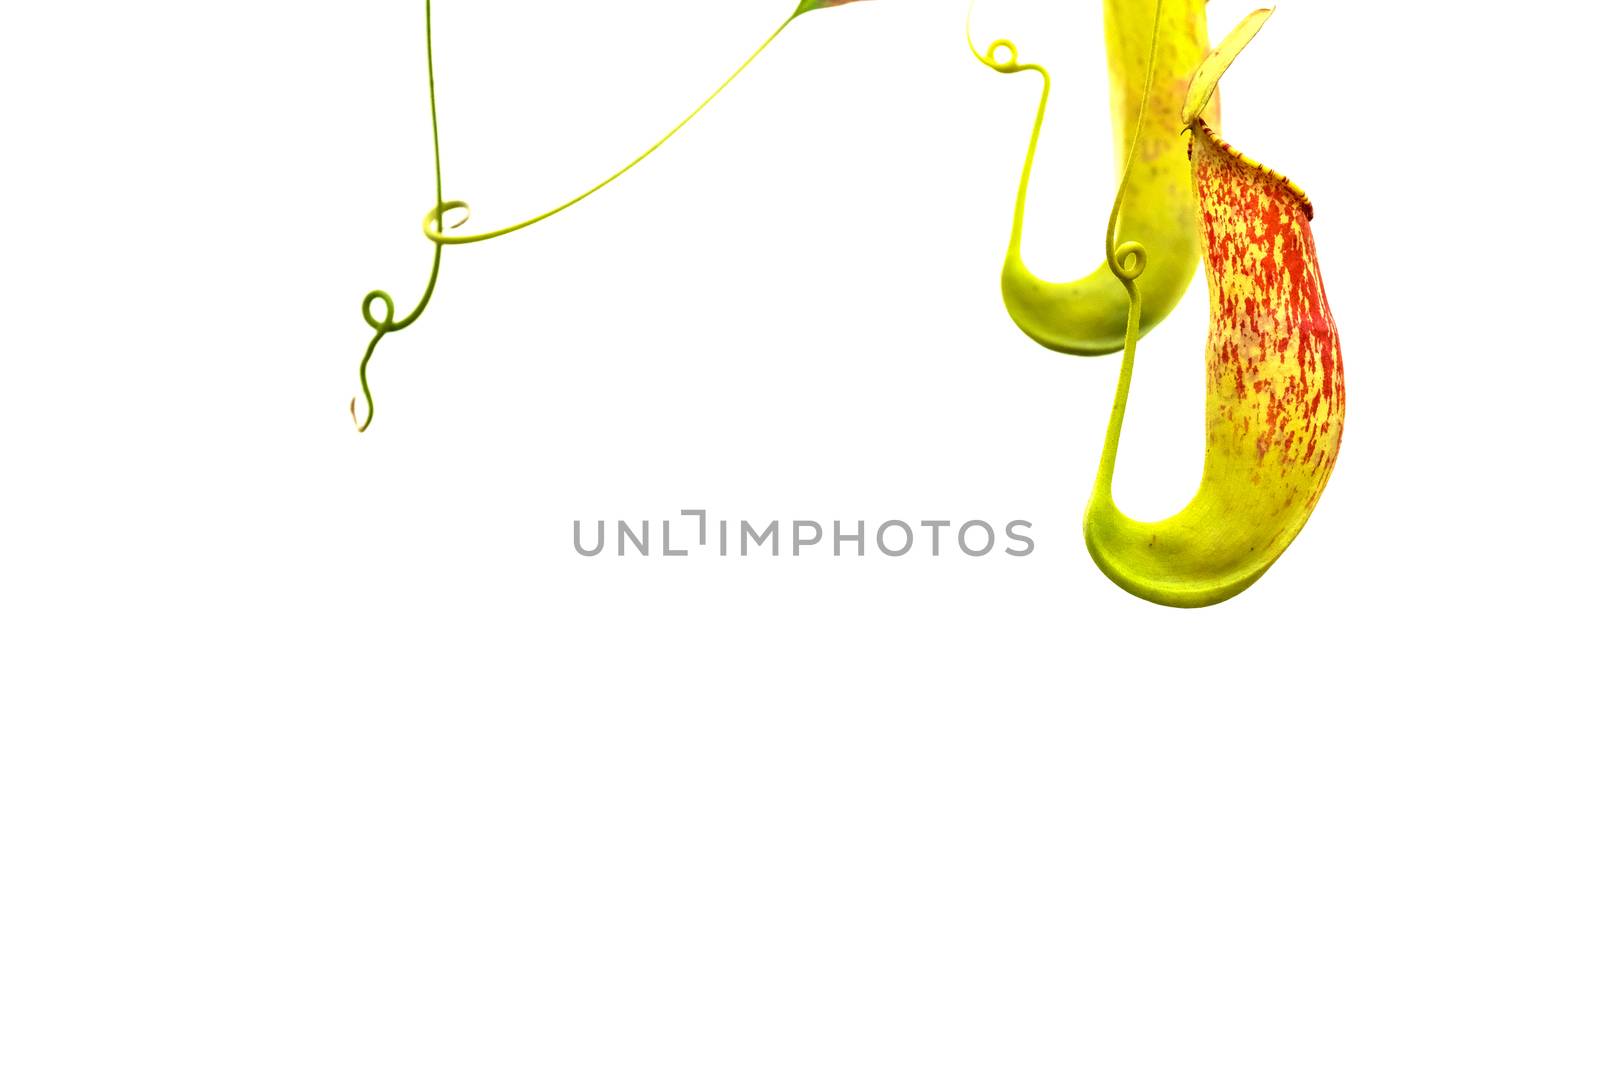 a pitcher plant in the Queen's botanical garden in the north of thailand, closeup shot, white background